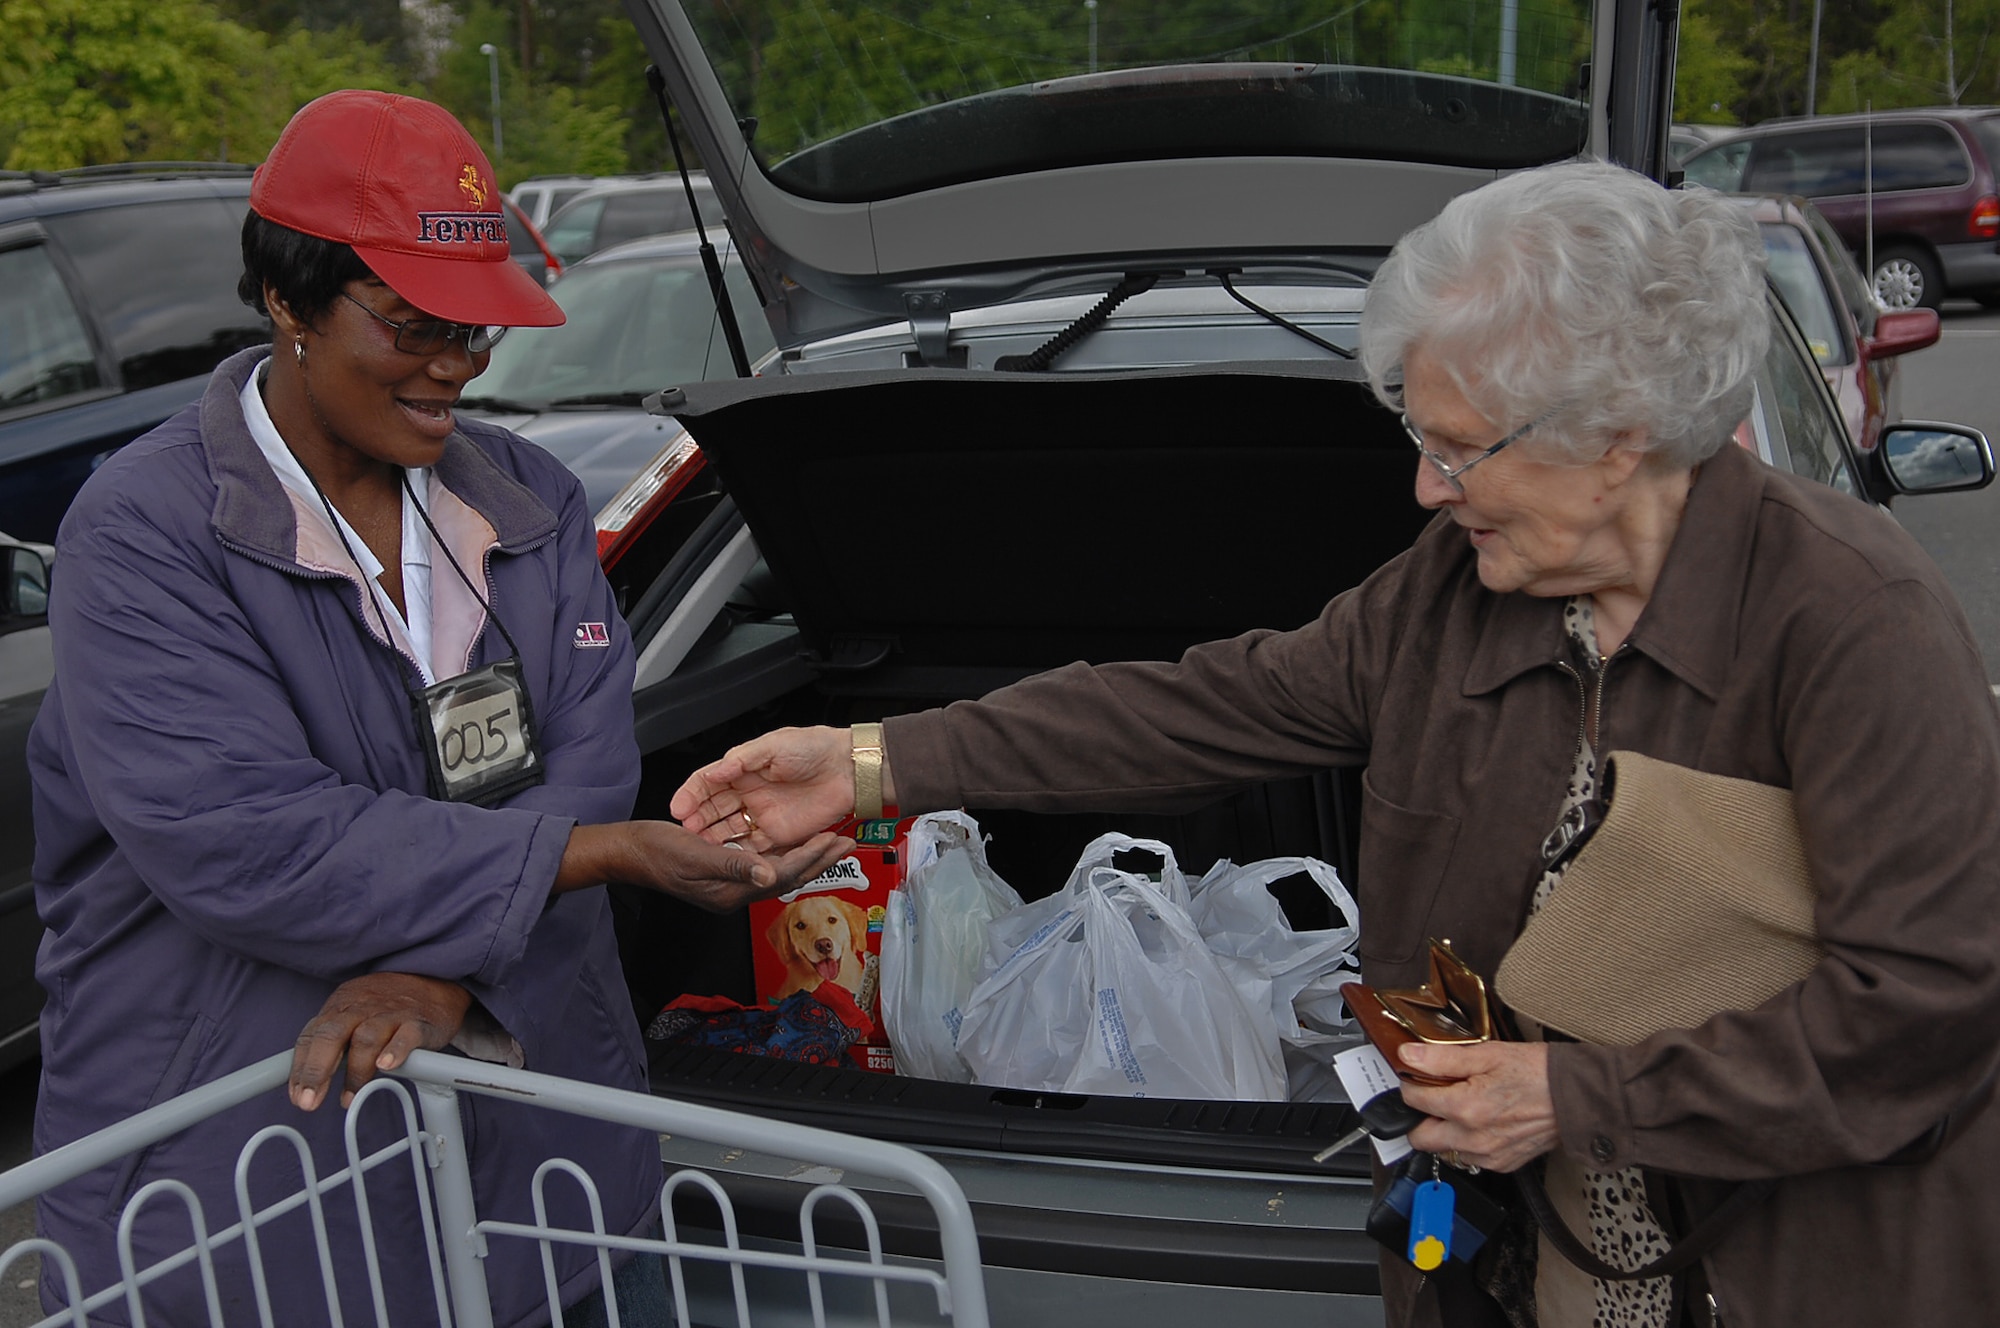 Gaby Bogindi (left), commissary bagger, is tipped by a customer after bagging and loading her groceries in her car, Ramstein Air Base, Germany, April 23, 2009. Baggers are self-employed and work under a license agreement with the installation commander. (U.S. Air Force photo by Airman 1st Class Tony R. Ritter)
